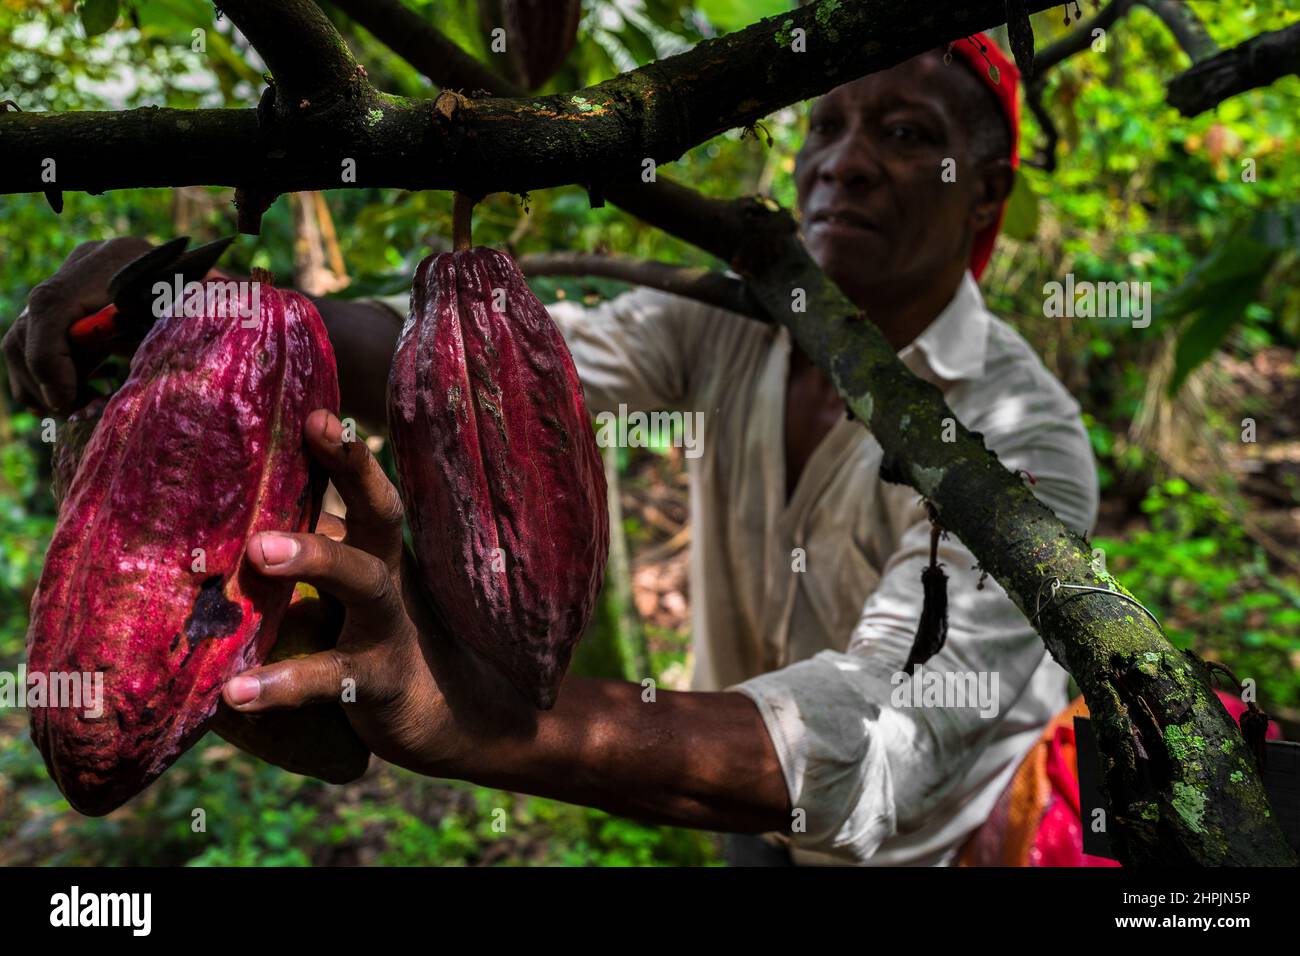 Rigoberto Balanta, an Afro-Colombian farmer, cuts cacao pods from a tree during a harvest on a traditional cacao farm in Cuernavaca, Cauca, Colombia. Stock Photo